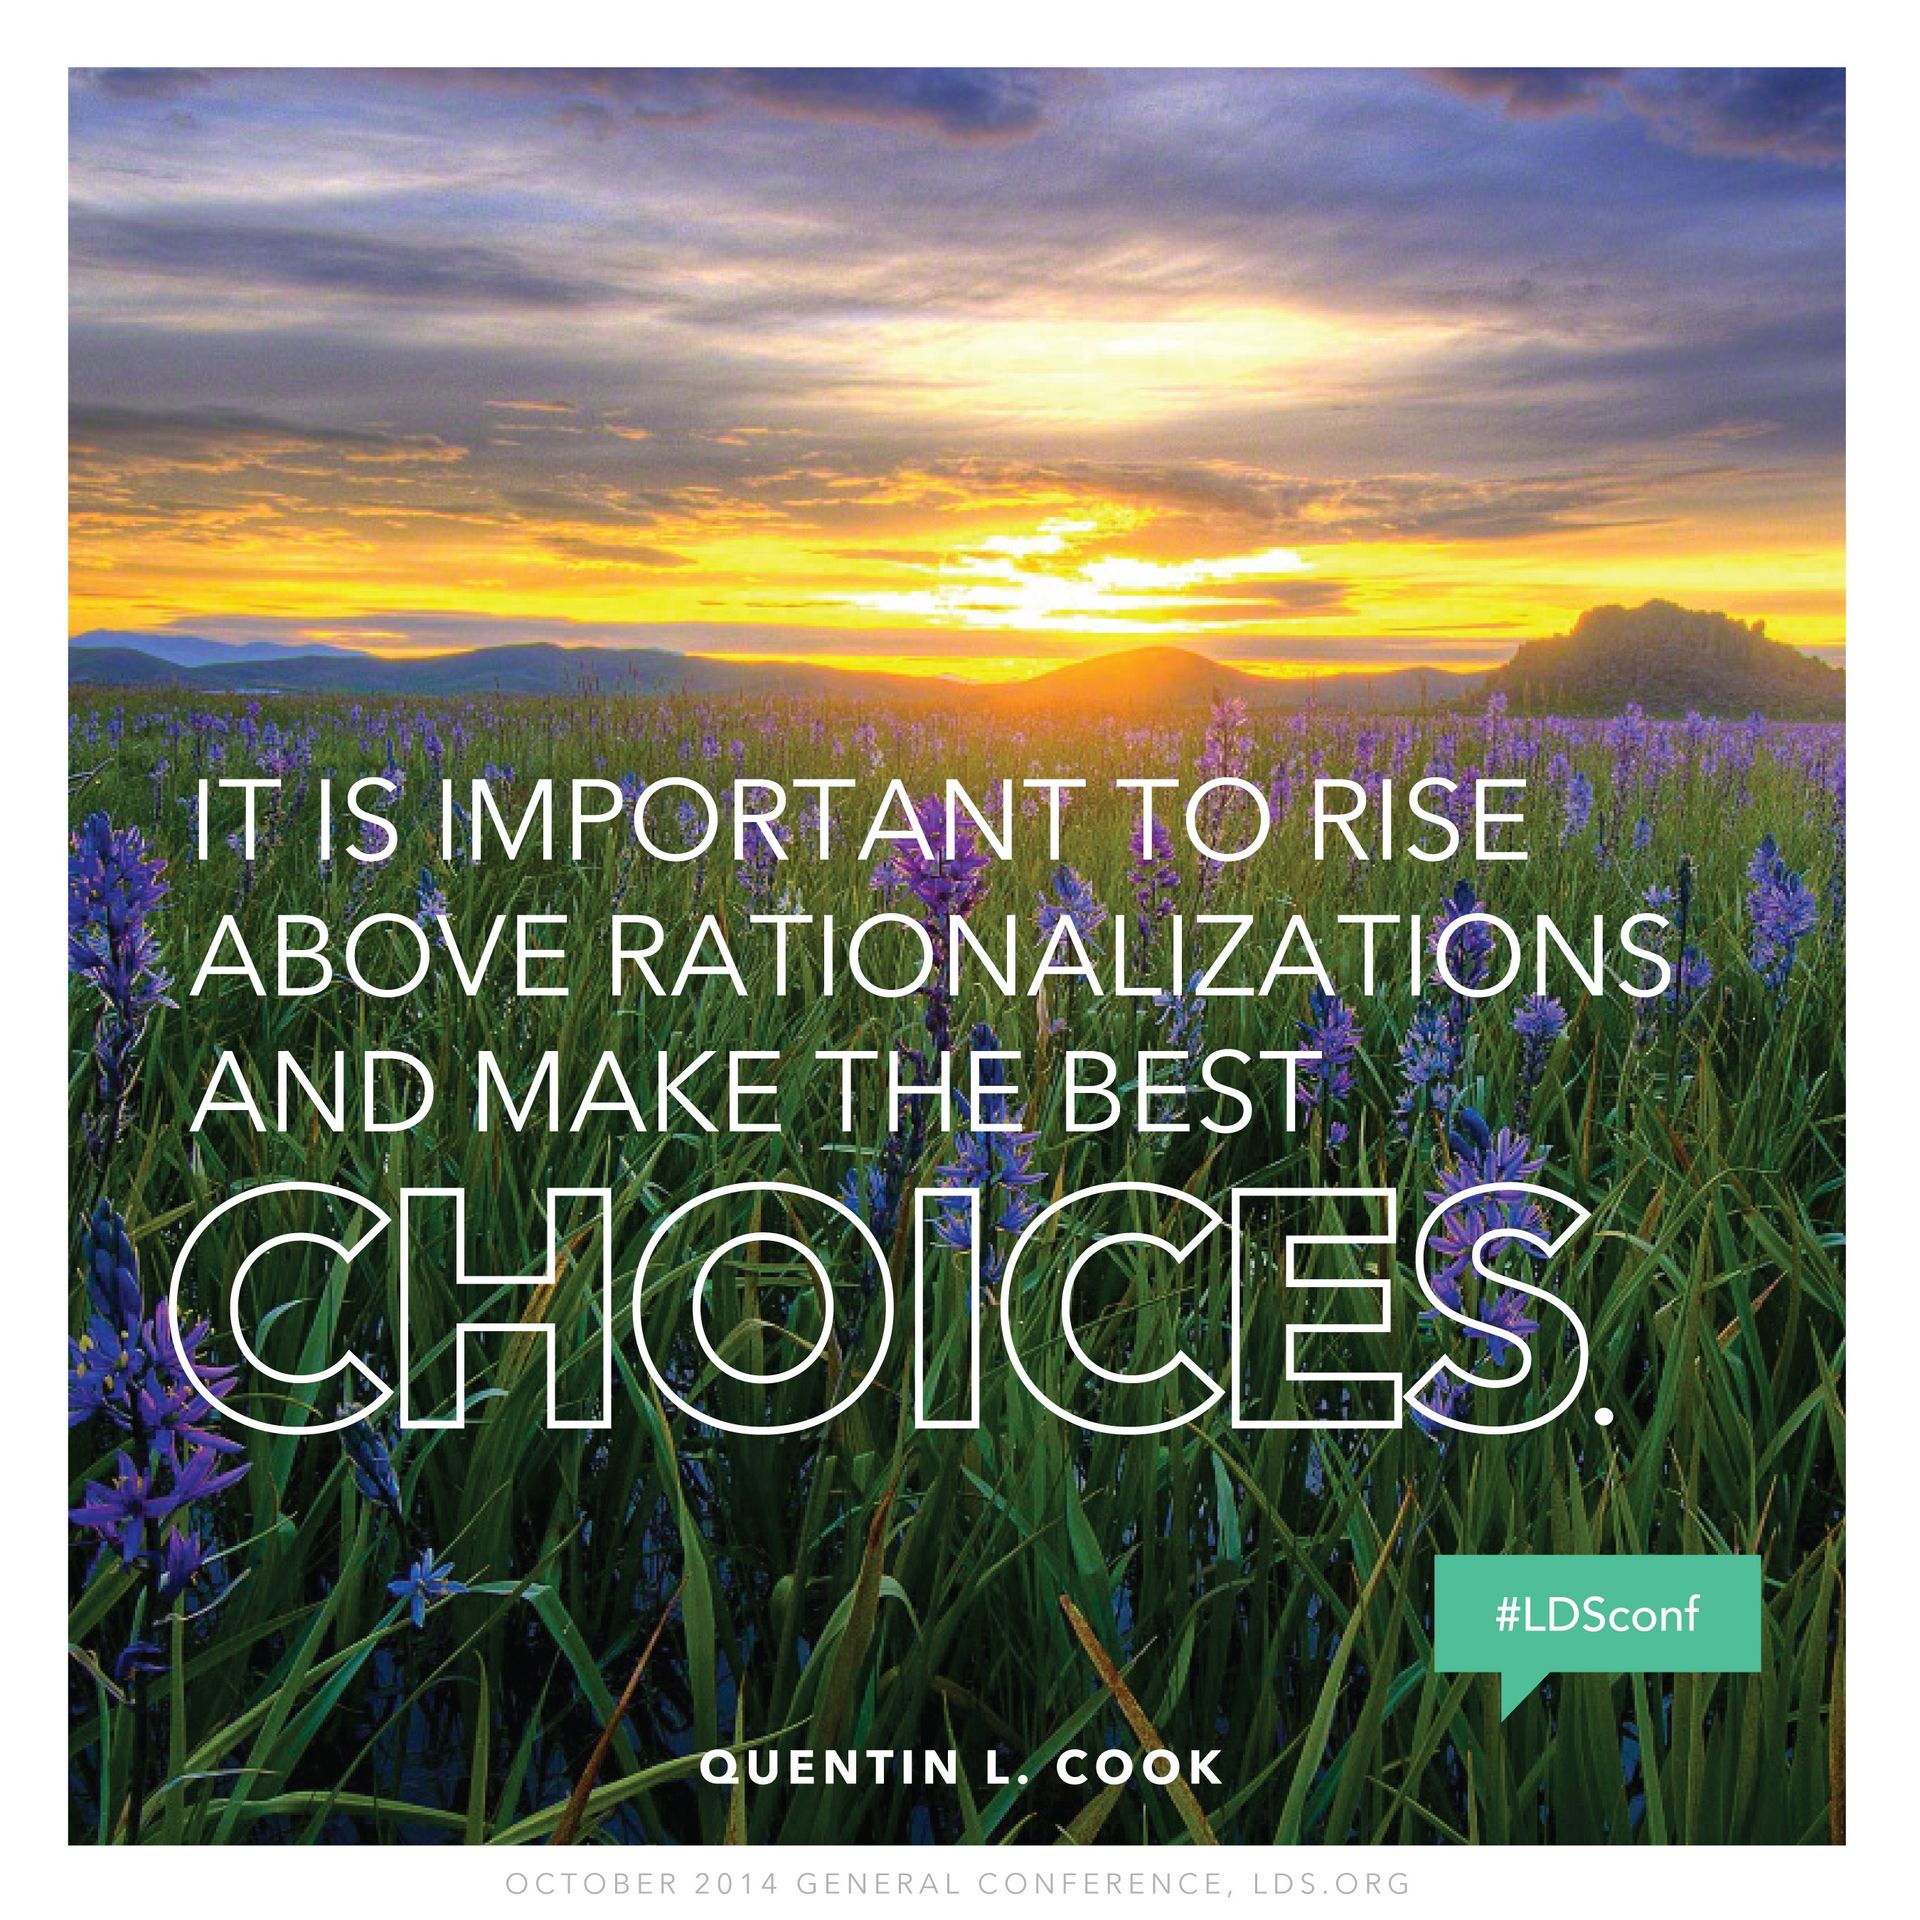 “It is important to rise above rationalizations and make the best choices.”—Elder Quentin L. Cook, “Choose Wisely” © undefined ipCode 1.